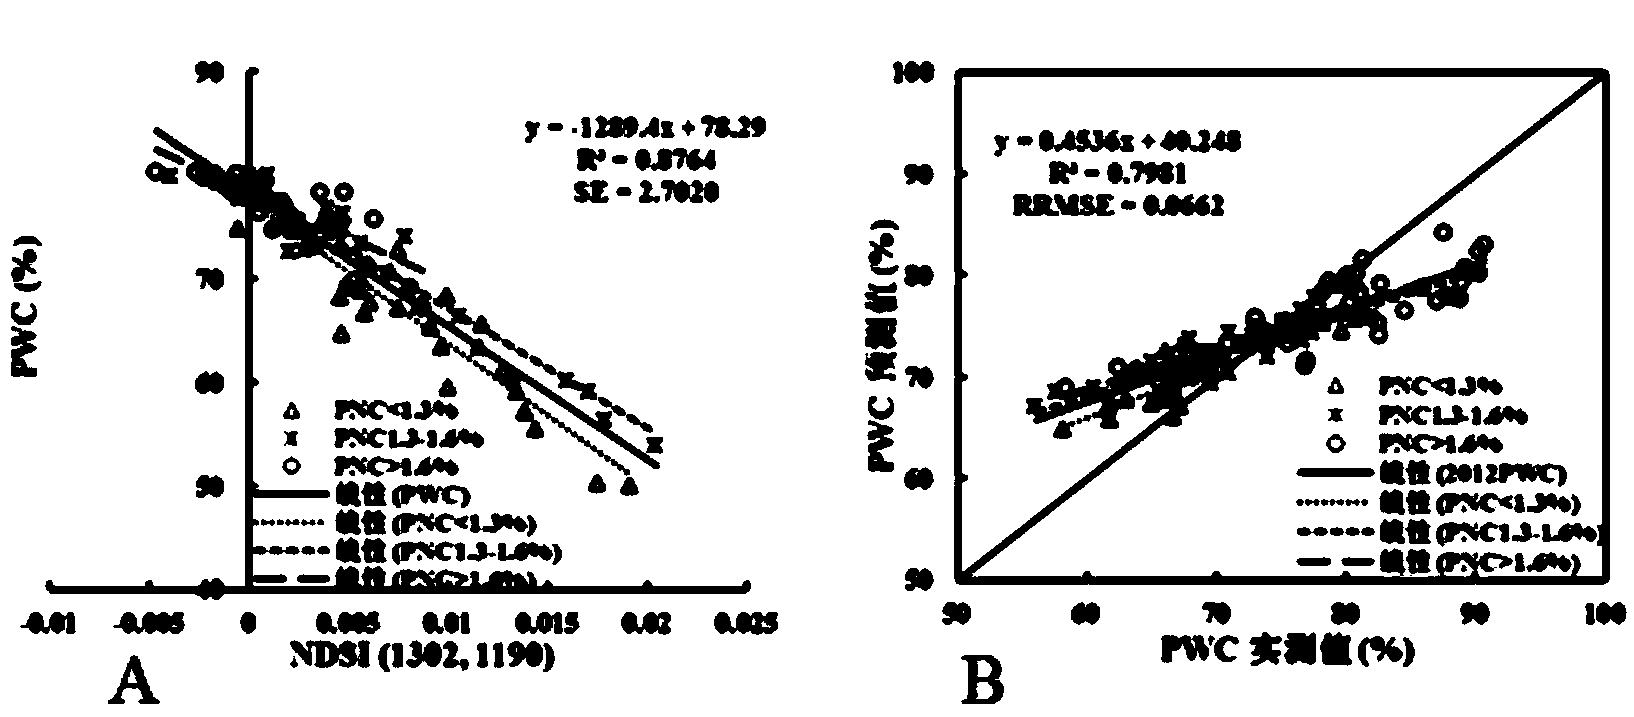 Method for monitoring wheat plant water content under different plant nitrogen content levels